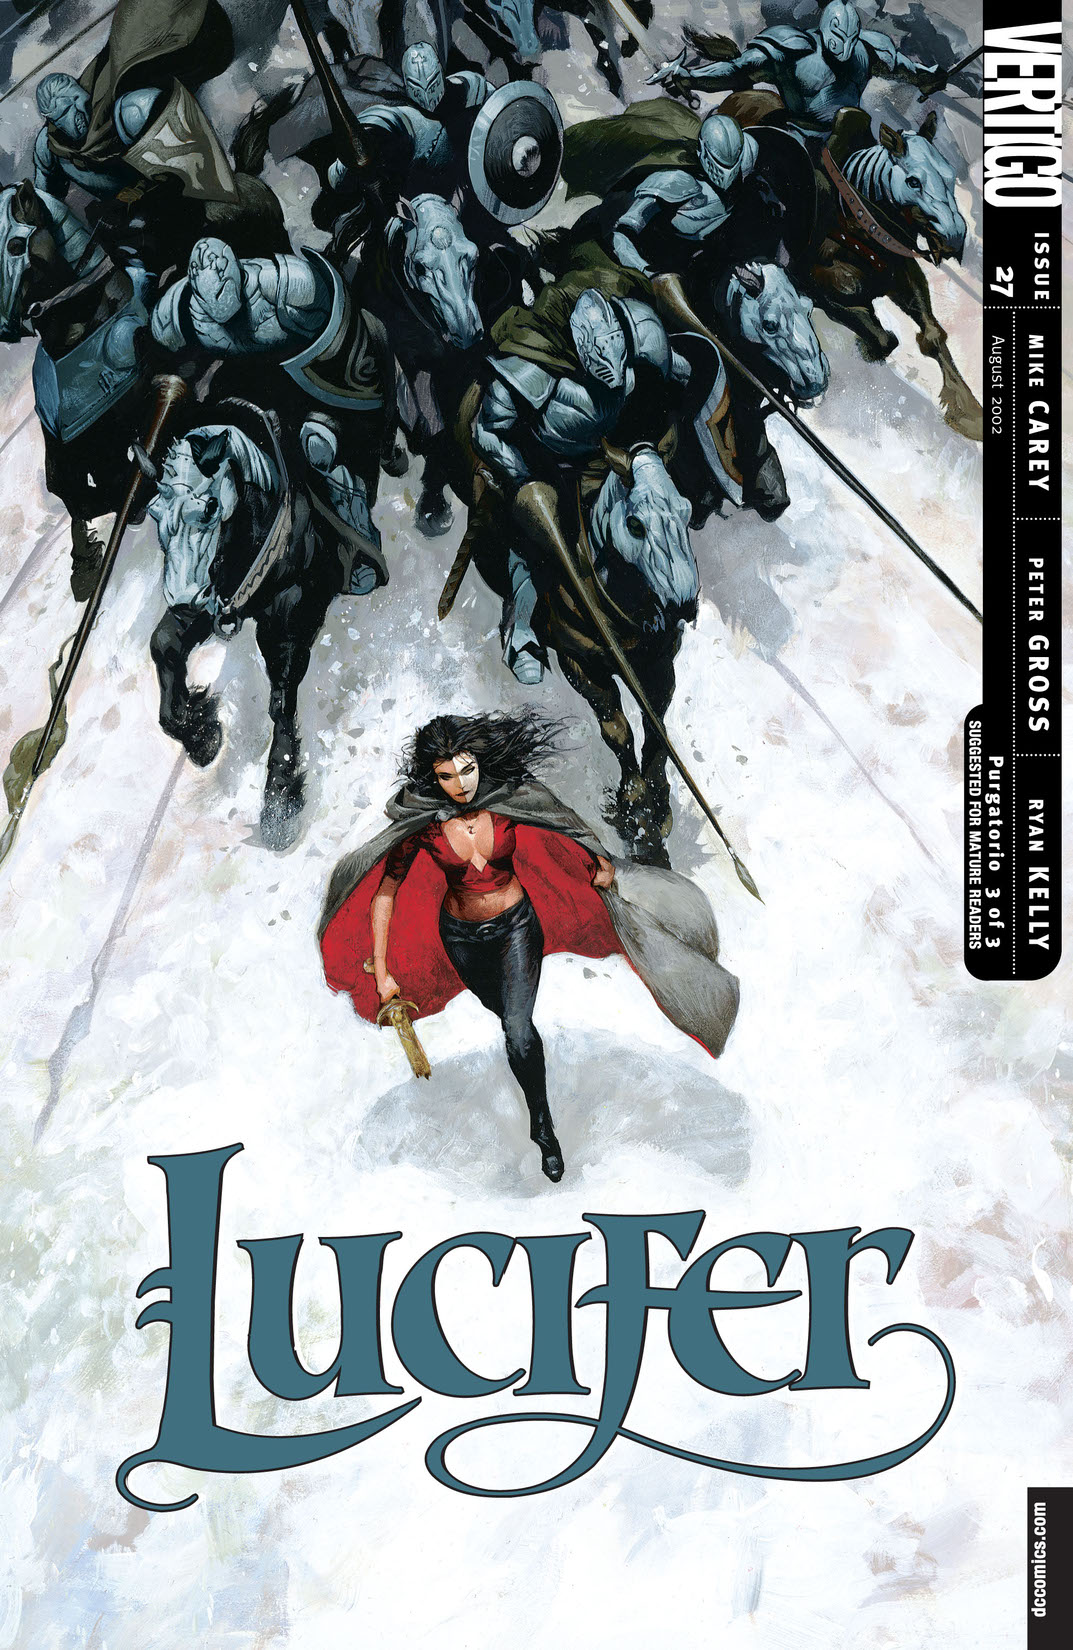 Lucifer #27 preview images